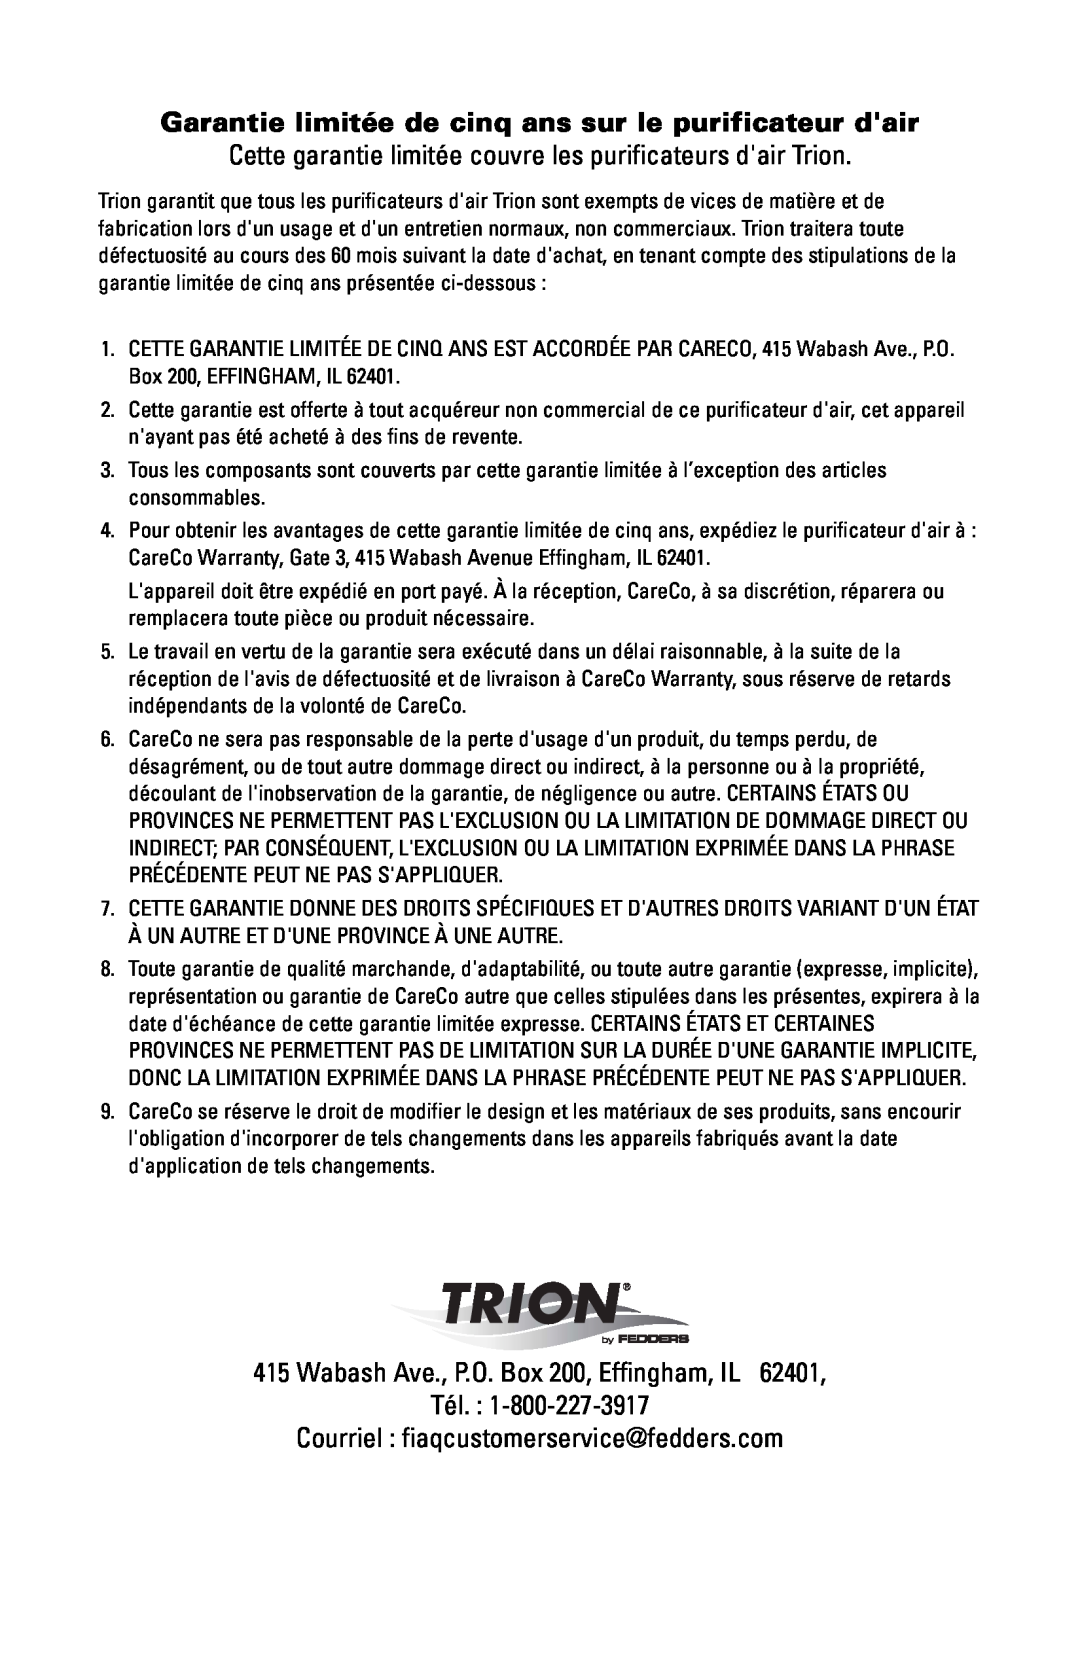 Trion High Efficiency Console Electronic Air Purifier manual Wabash Ave., P.O. Box 200, Effingham, IL 